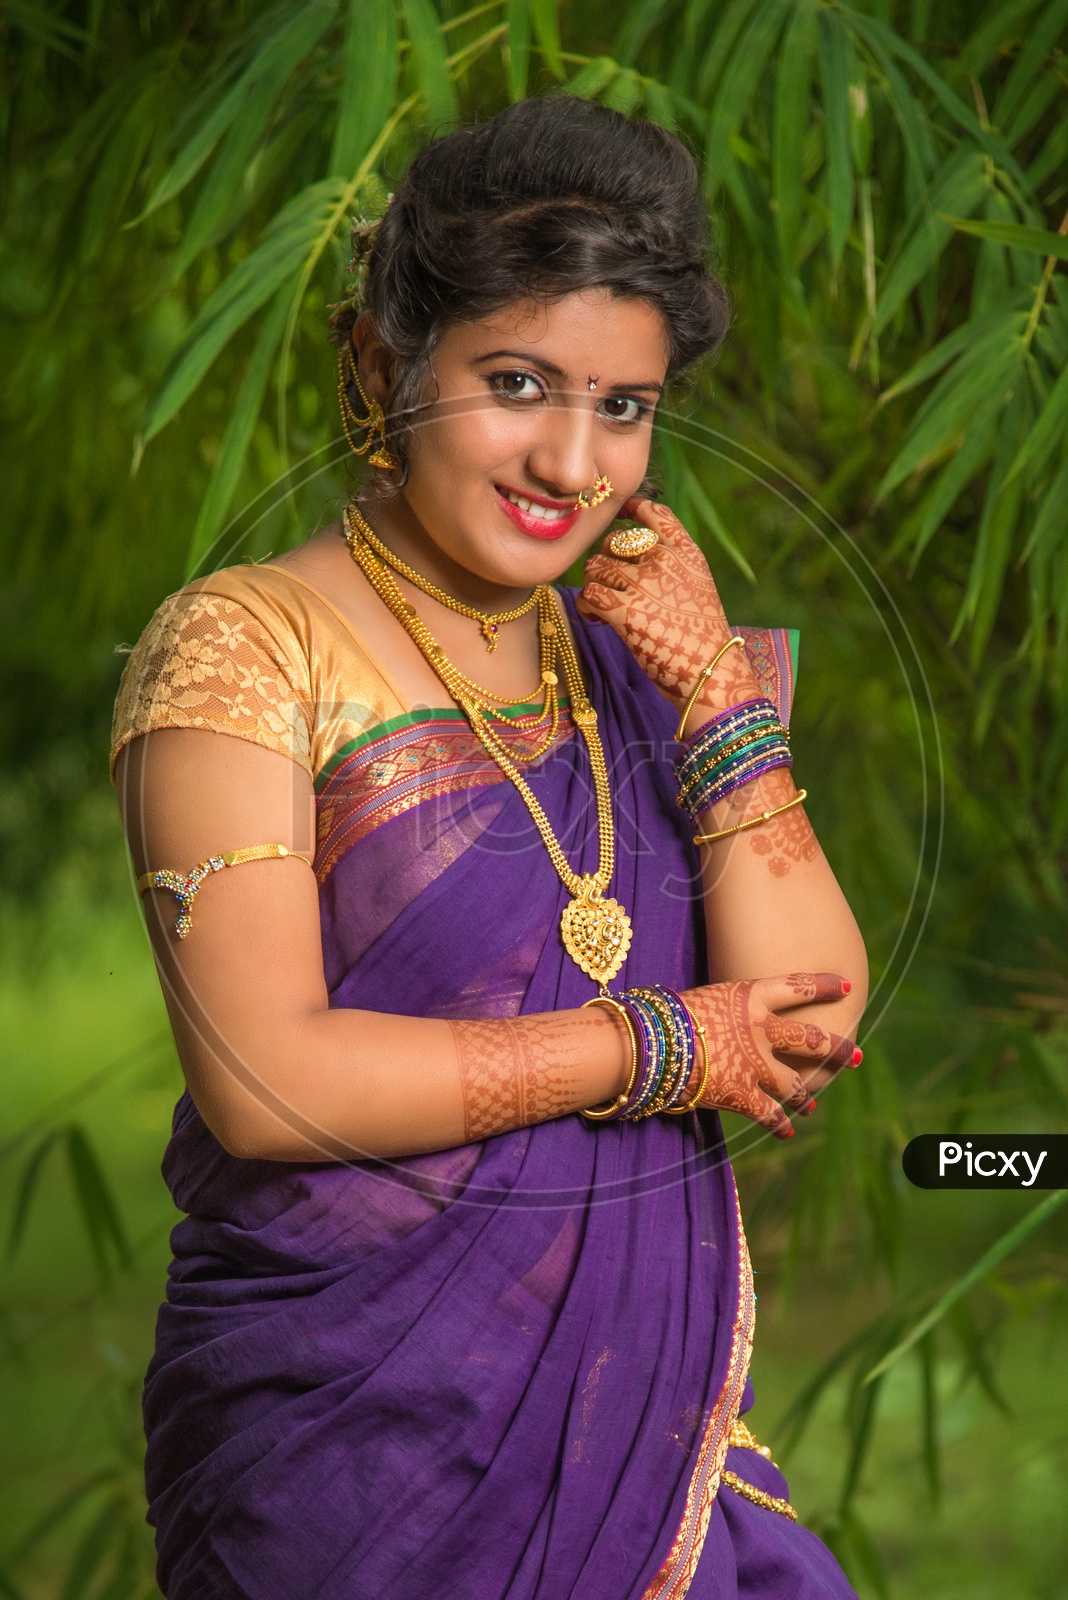 Simple Bridal Makeup Look for South Indian Brides | Indian bride poses,  Indian bride photography poses, Bride photos poses